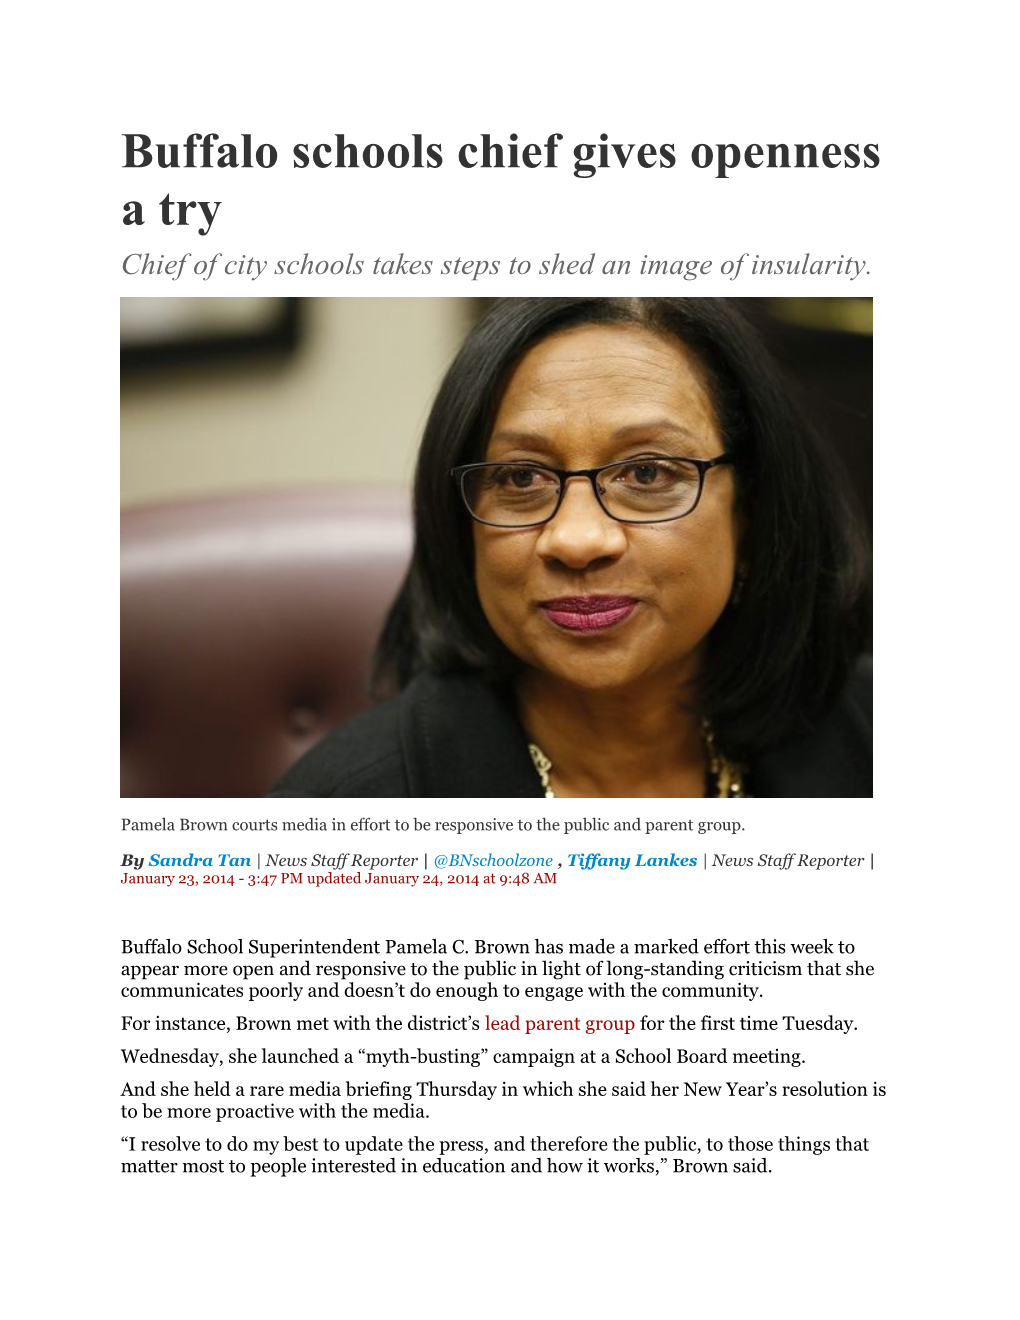 Buffalo Schools Chief Gives Openness a Try